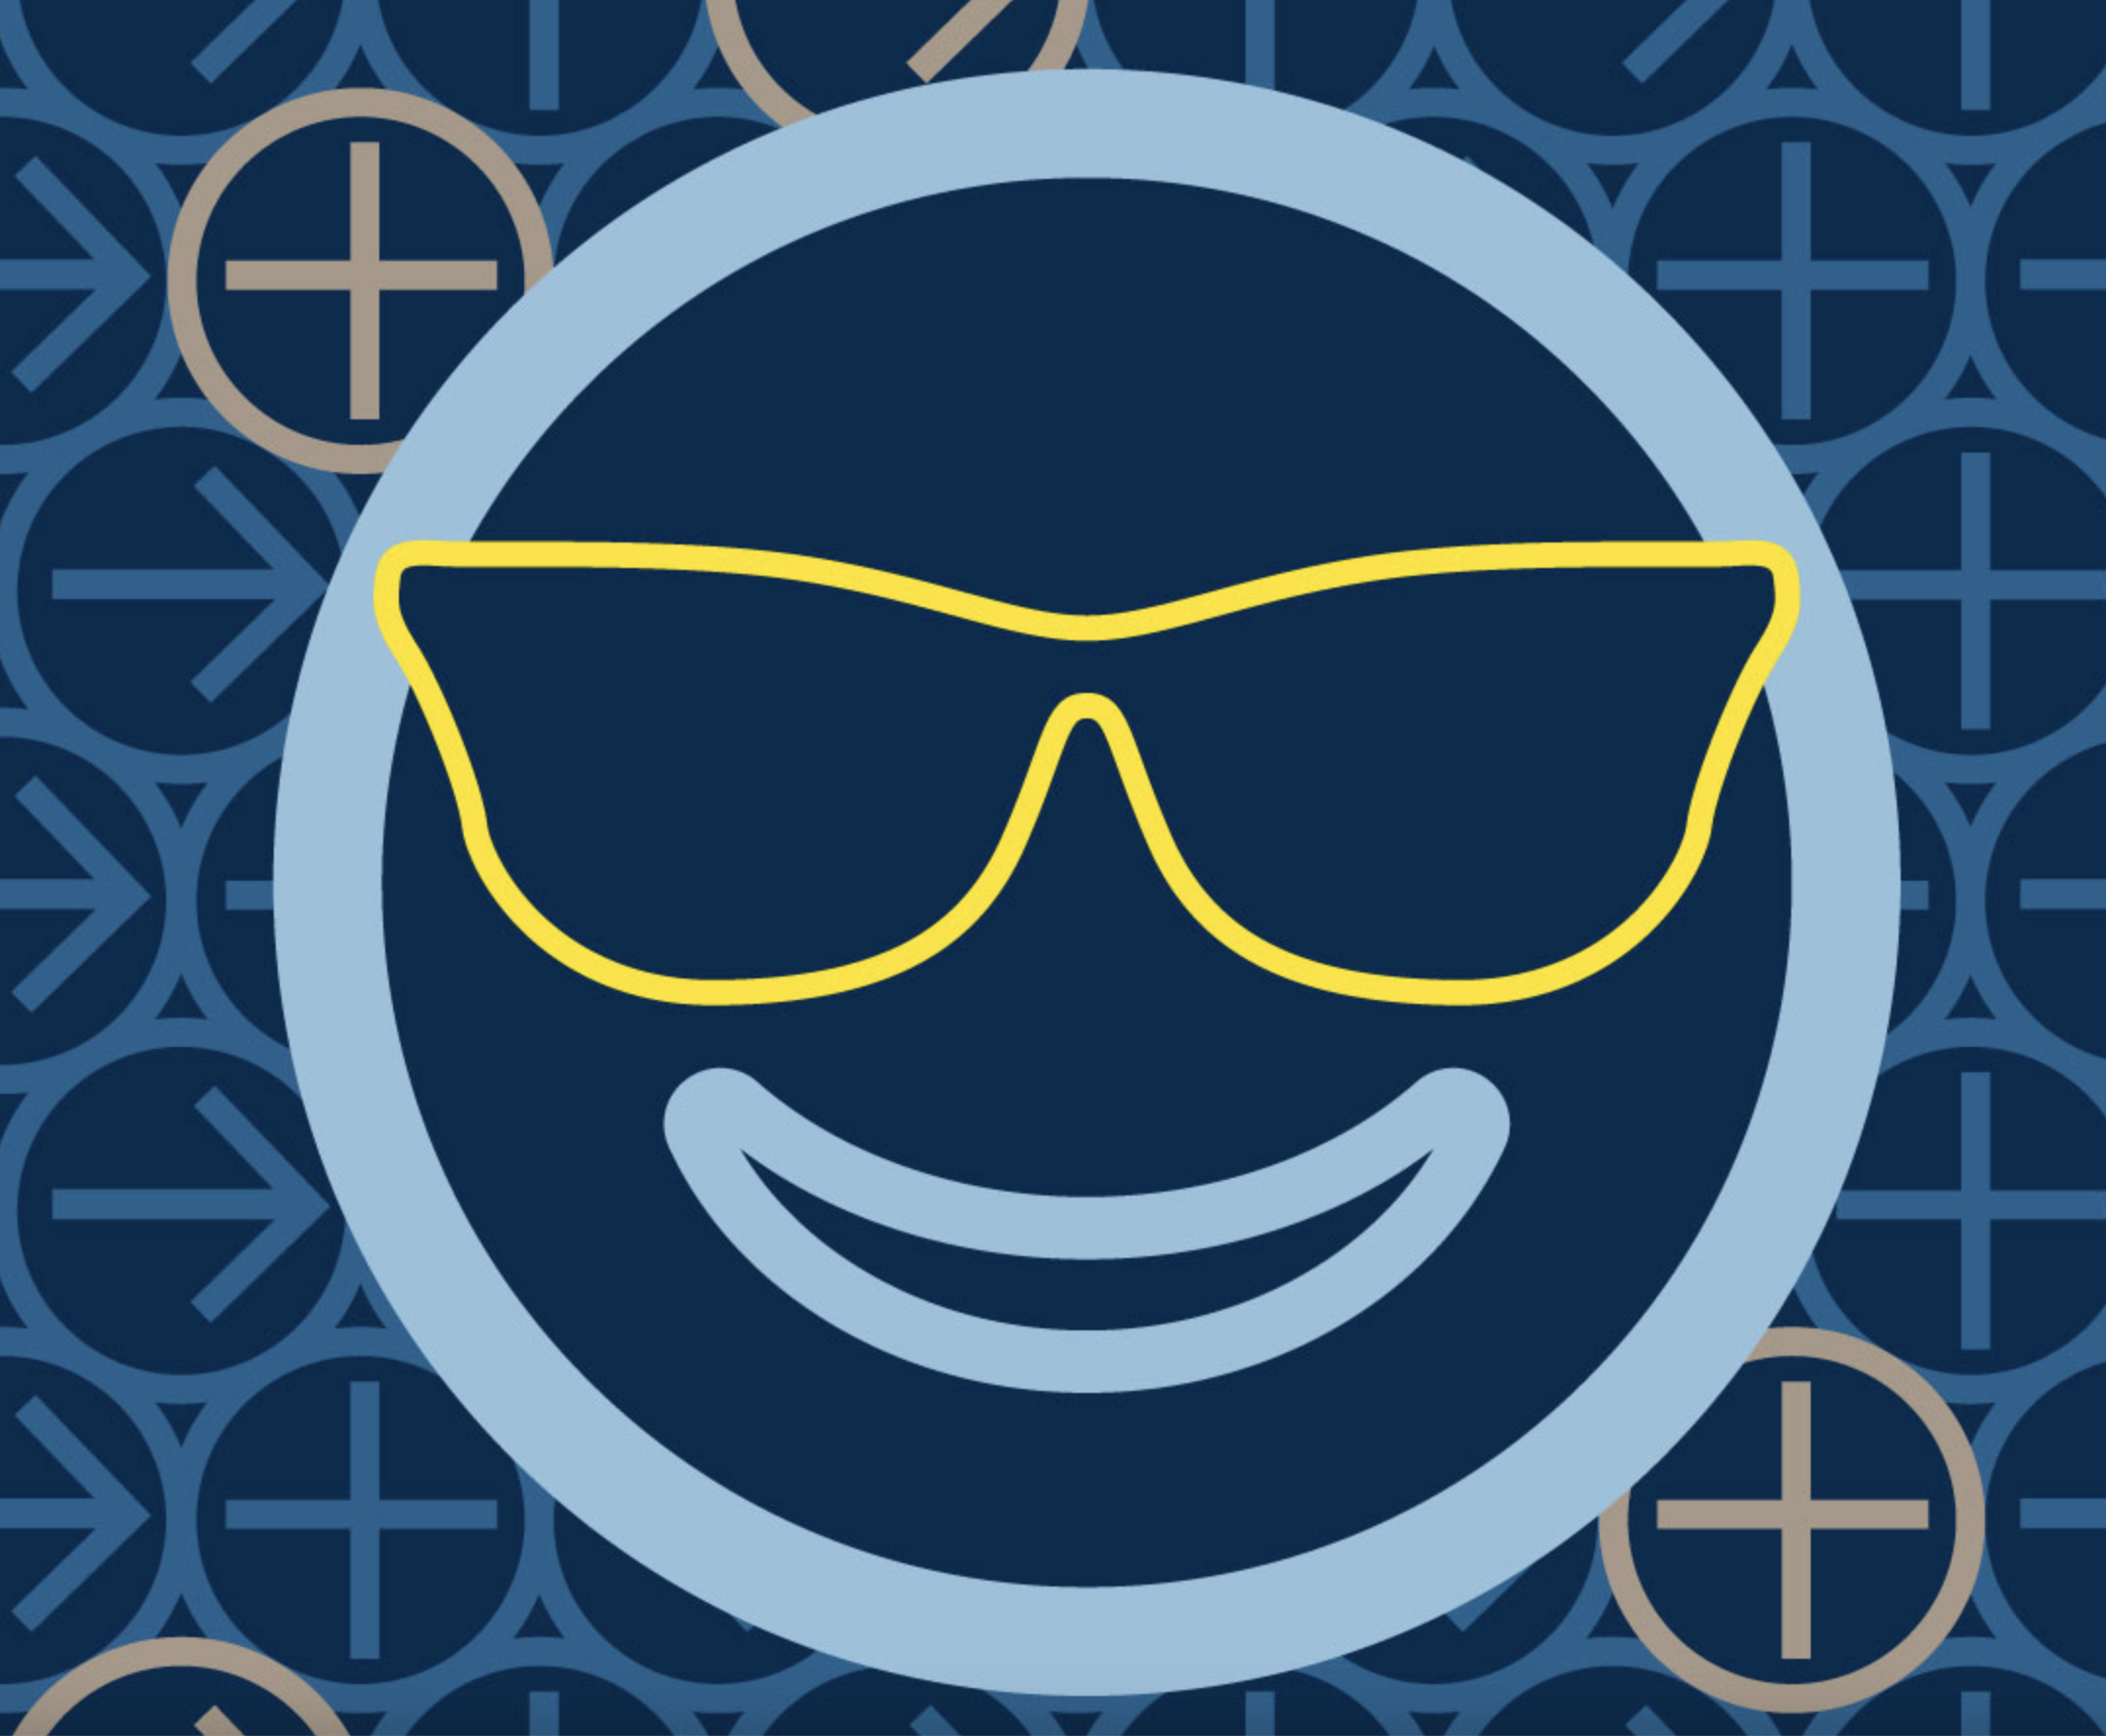 LVC branded smiley face graphic